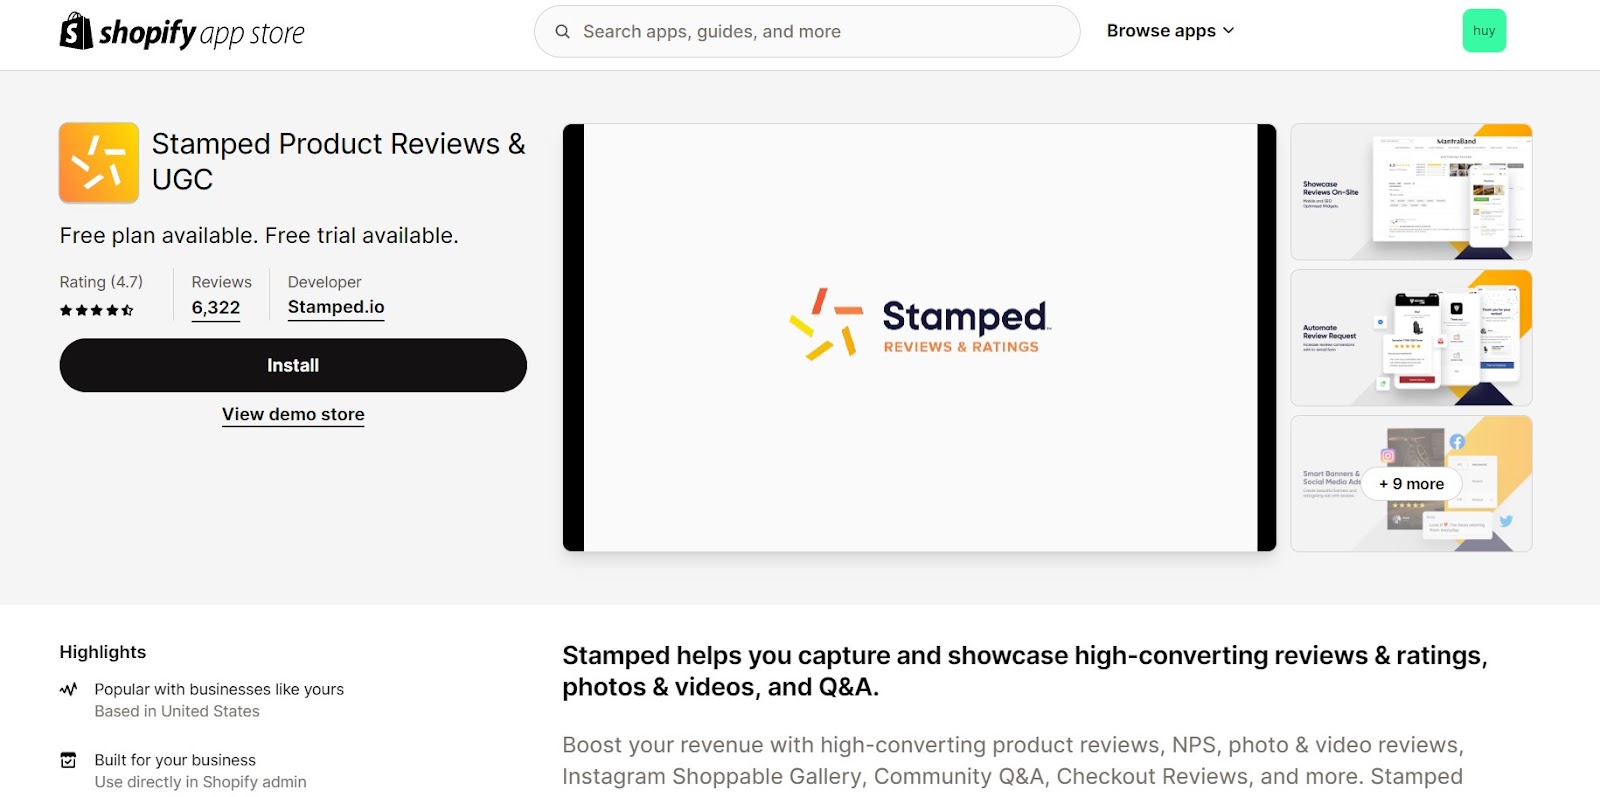 Stamped Product Reviews & UGC